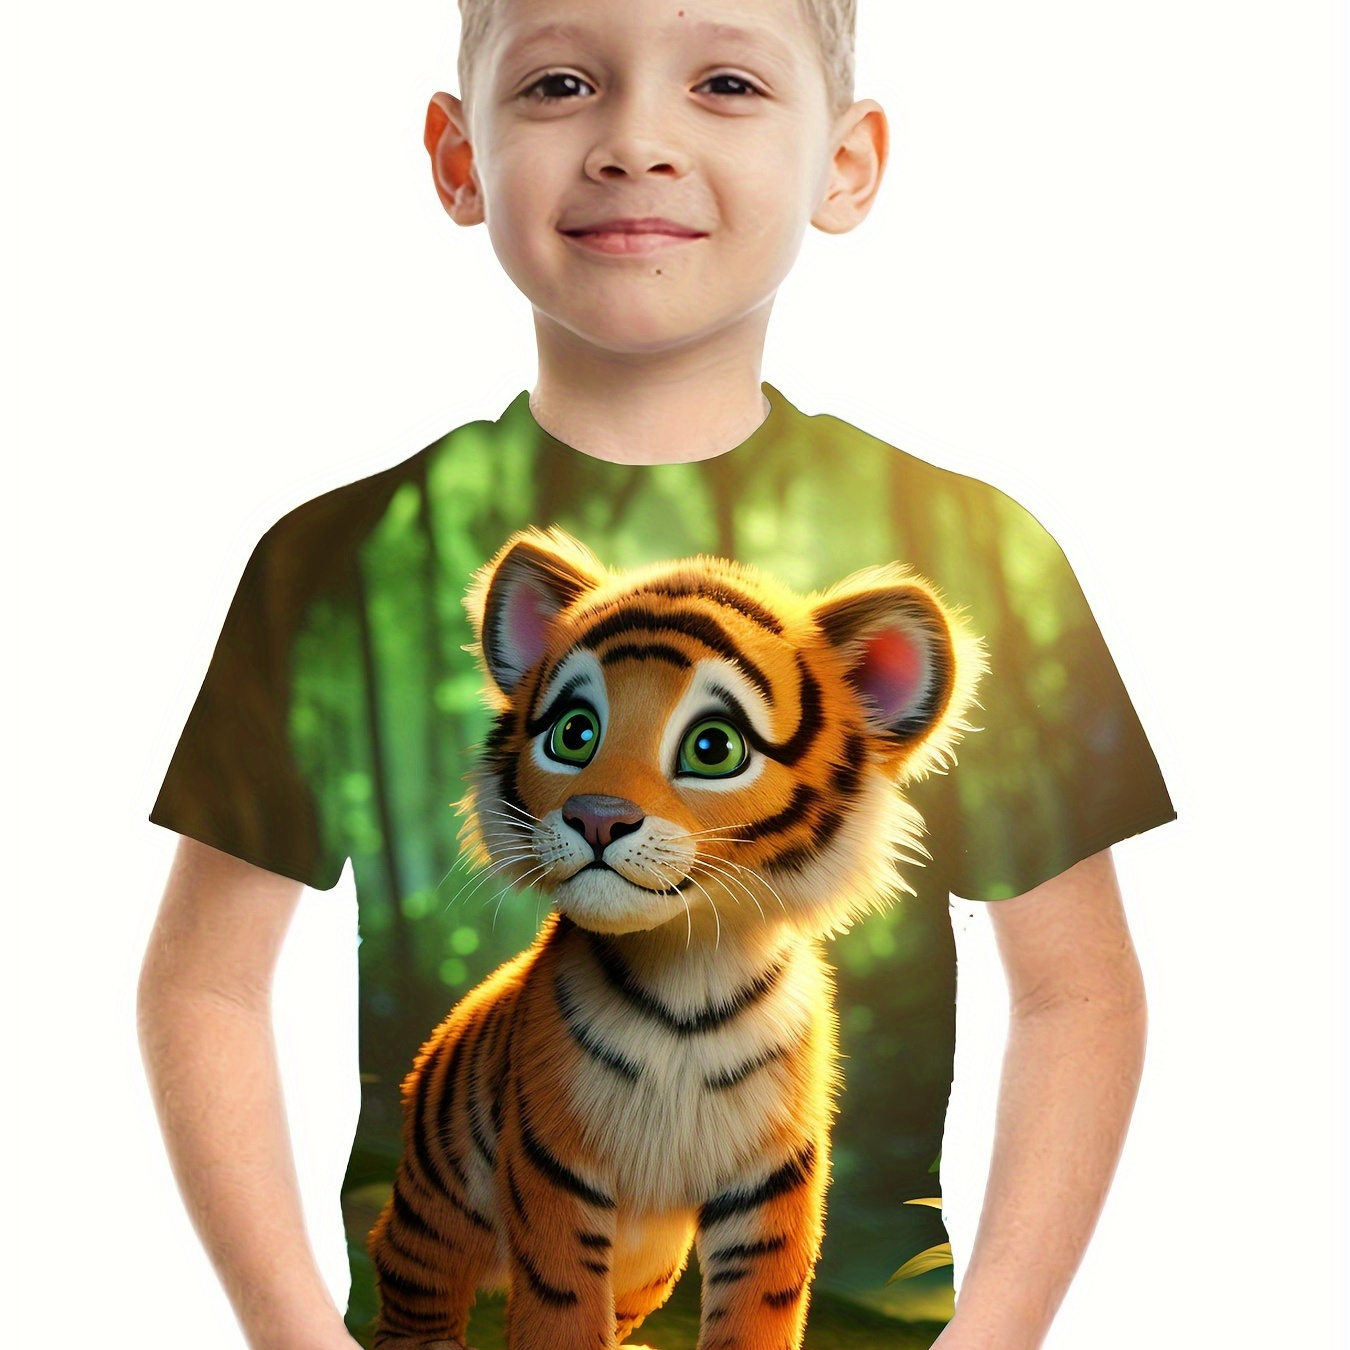 

Cute Little Tiger 3d Print T-shirt, Tees For Boys, Casual Short Sleeve T-shirt For Summer Spring Fall